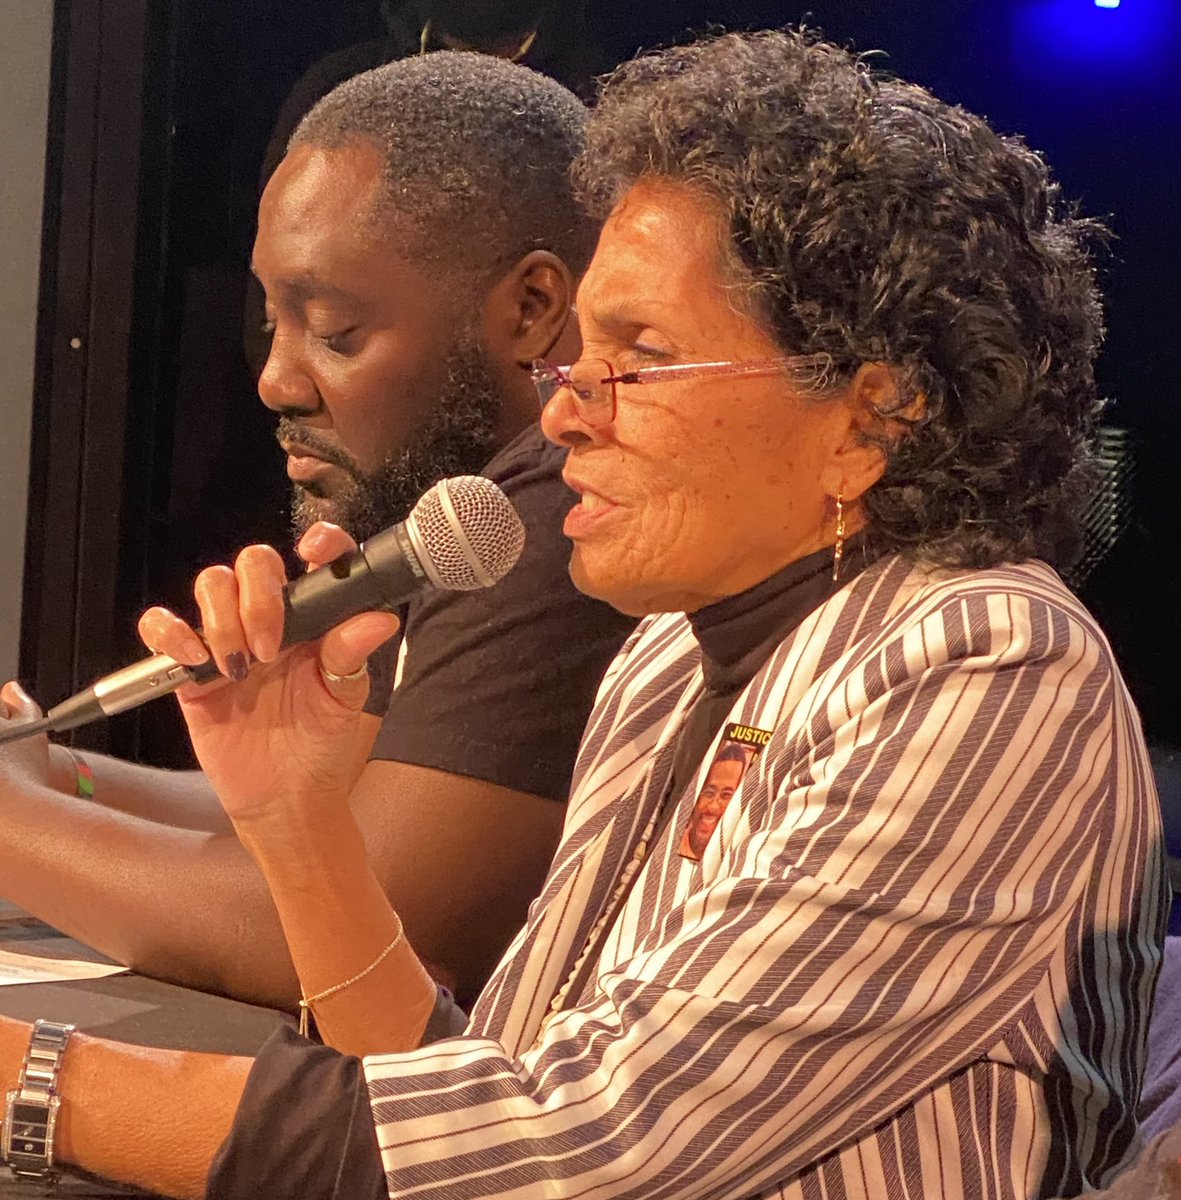 “The theft of Black life is a genocide.” -Ms. Mona Hardin, mother of #RonaldGreene at panel for #StevePerkins in Decatur, AL